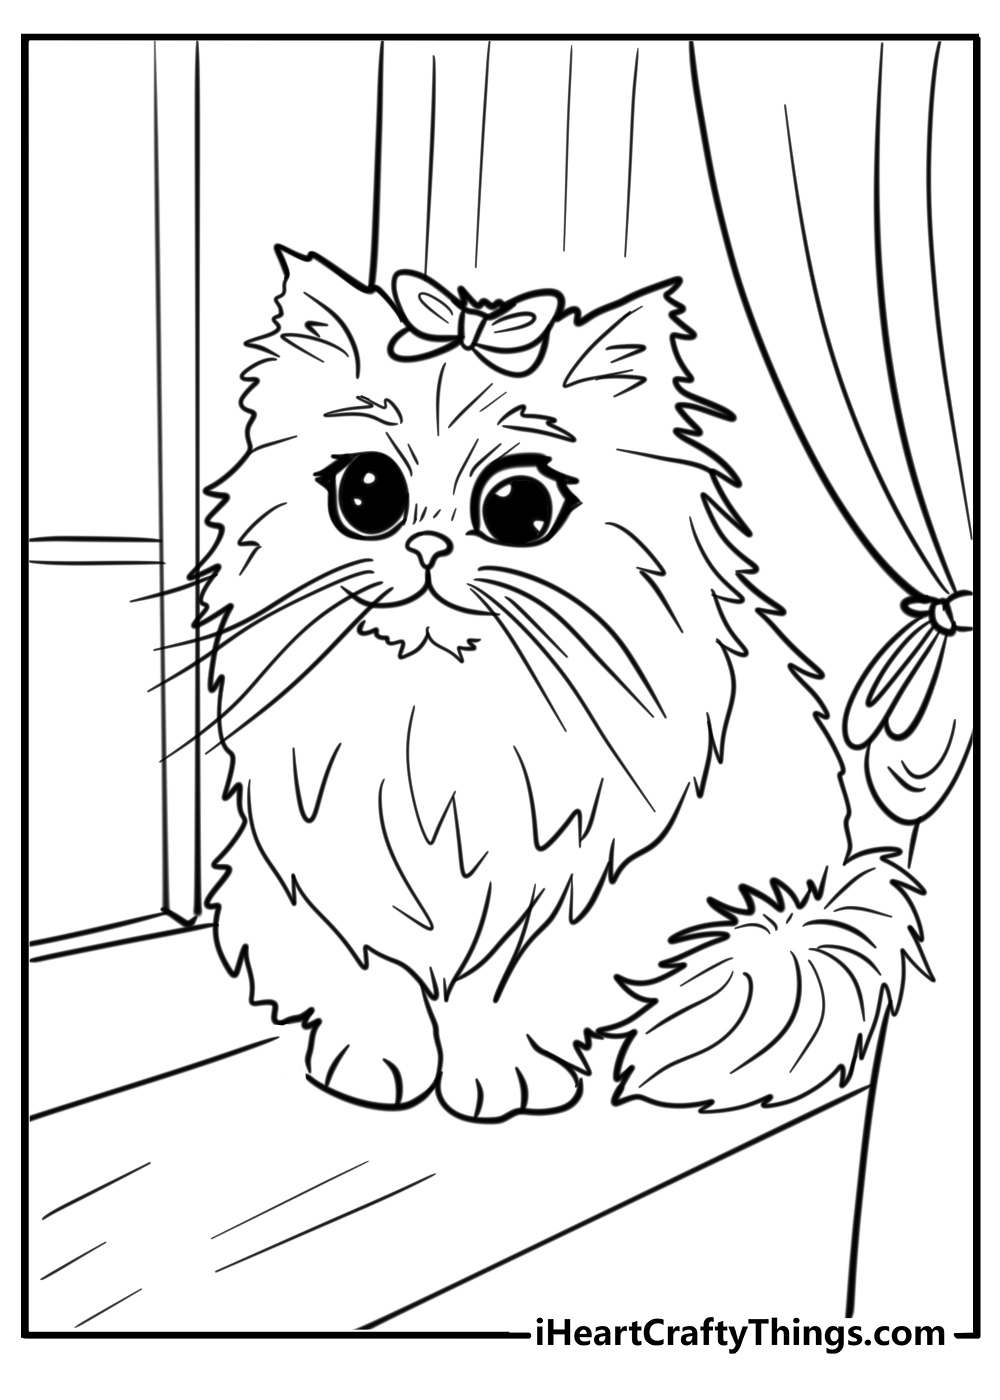 Cute animals coloring page of cute fluffy cat